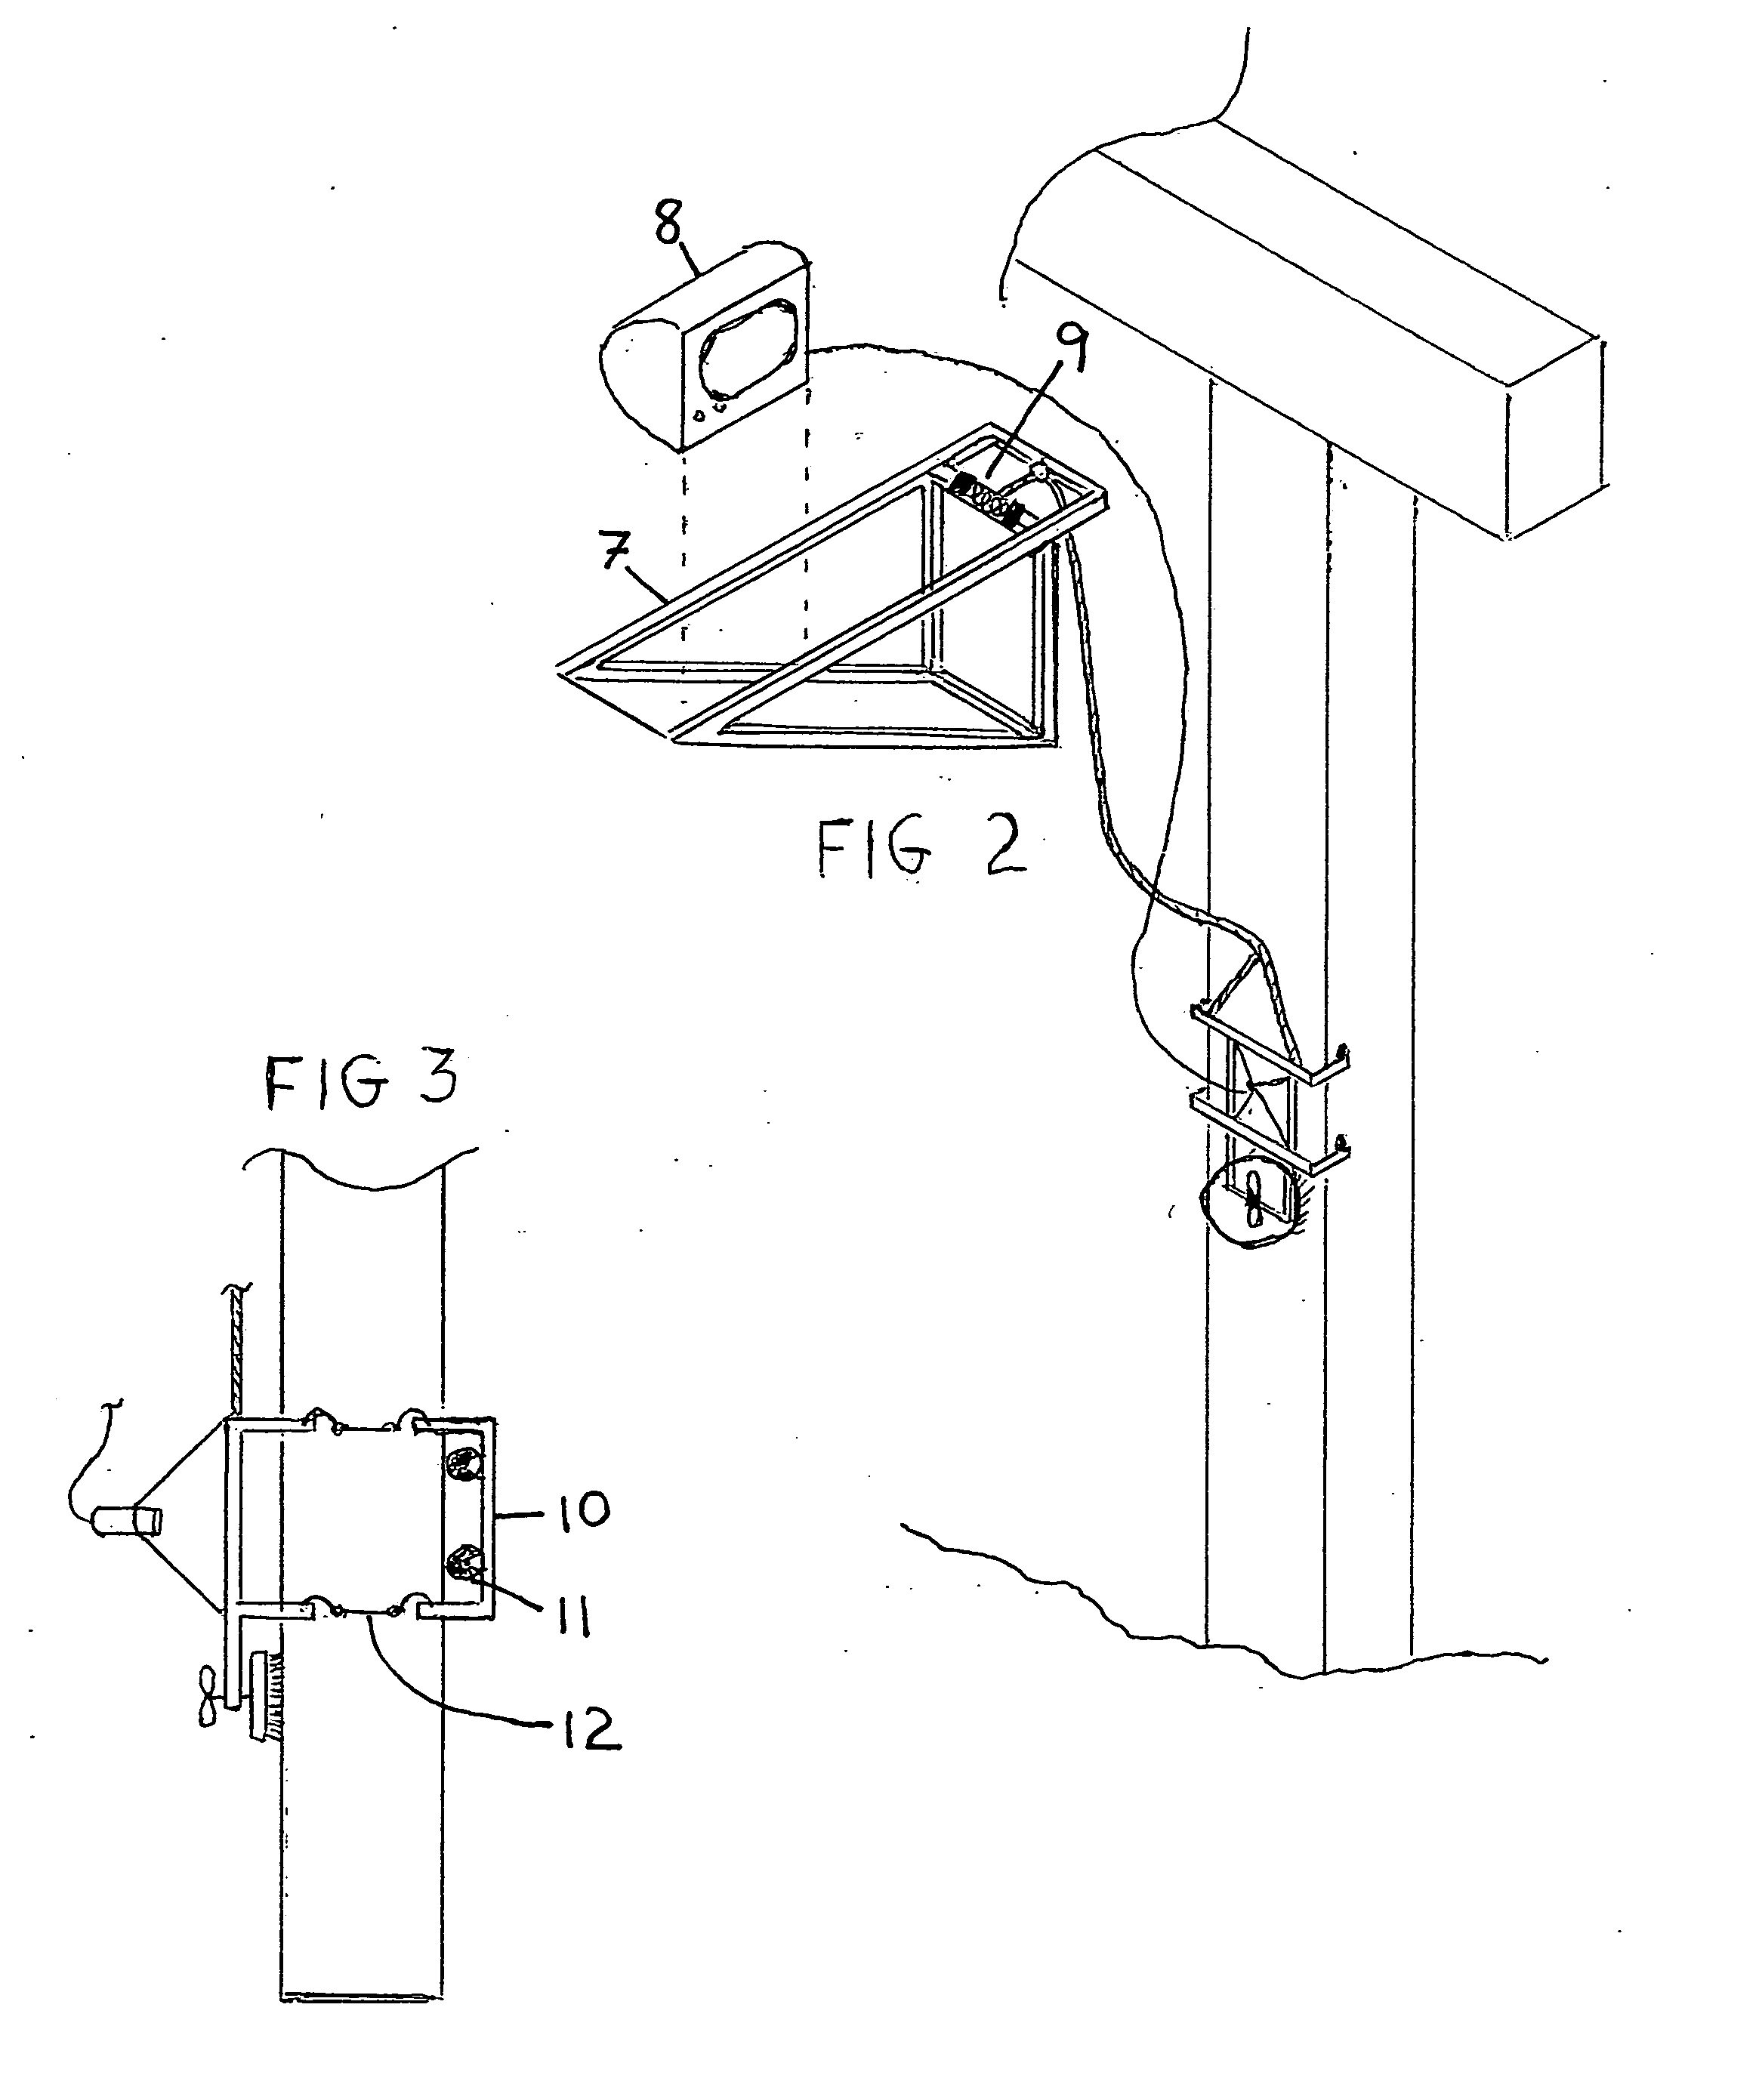 Method & Apparatus for Remote Cleaning & Inspection of Underwater Structures